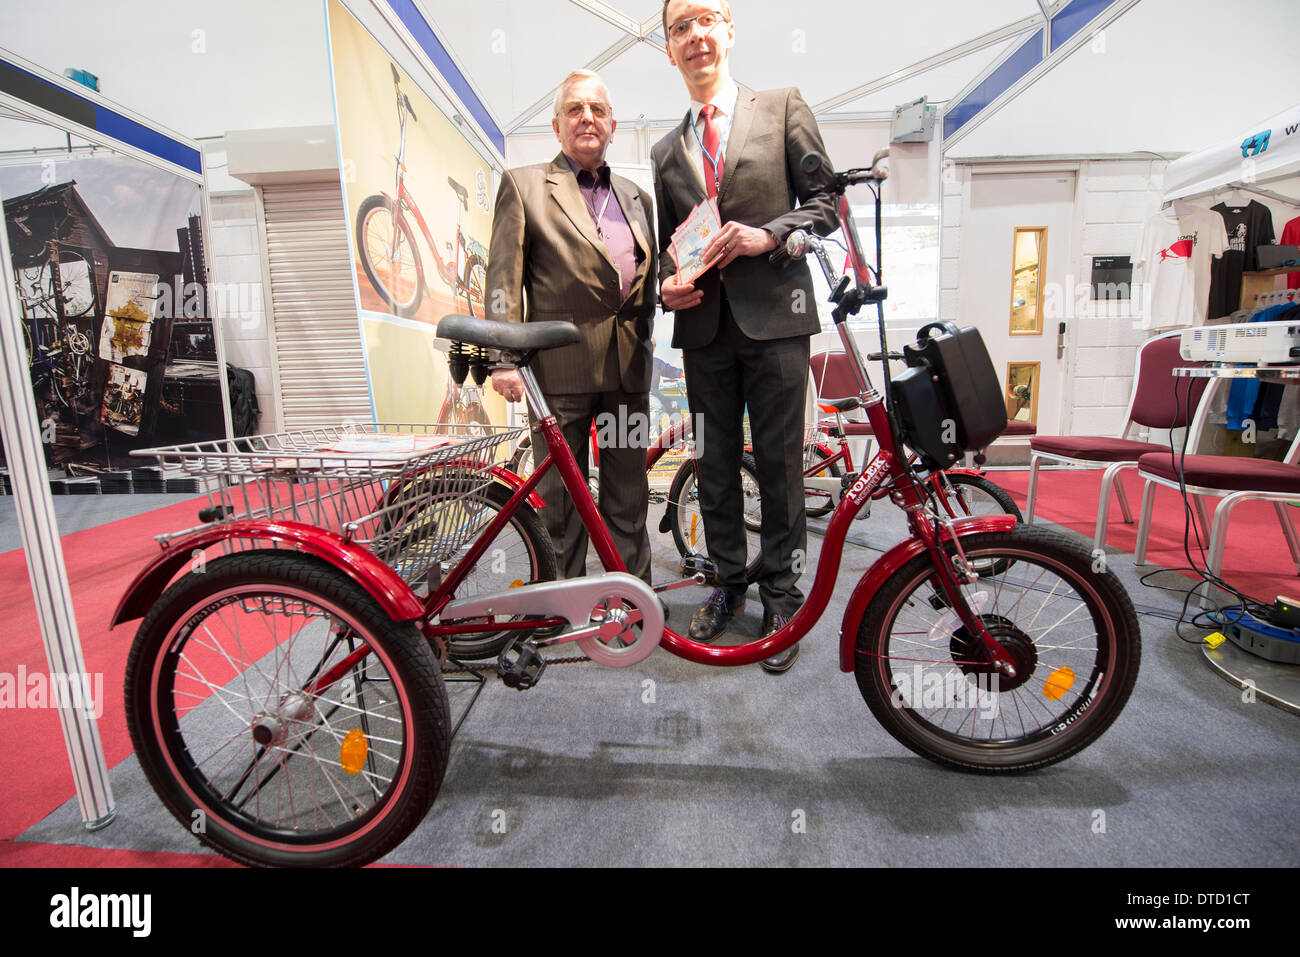 London, UK. 15th Feb, 2014. The UK’s largest cycling exhibition showcases many new bikes. The new Polish designed Tolek electric trike is launched in the UK at the exhibition. Credit:  Malcolm Park editorial/Alamy Live News Stock Photo